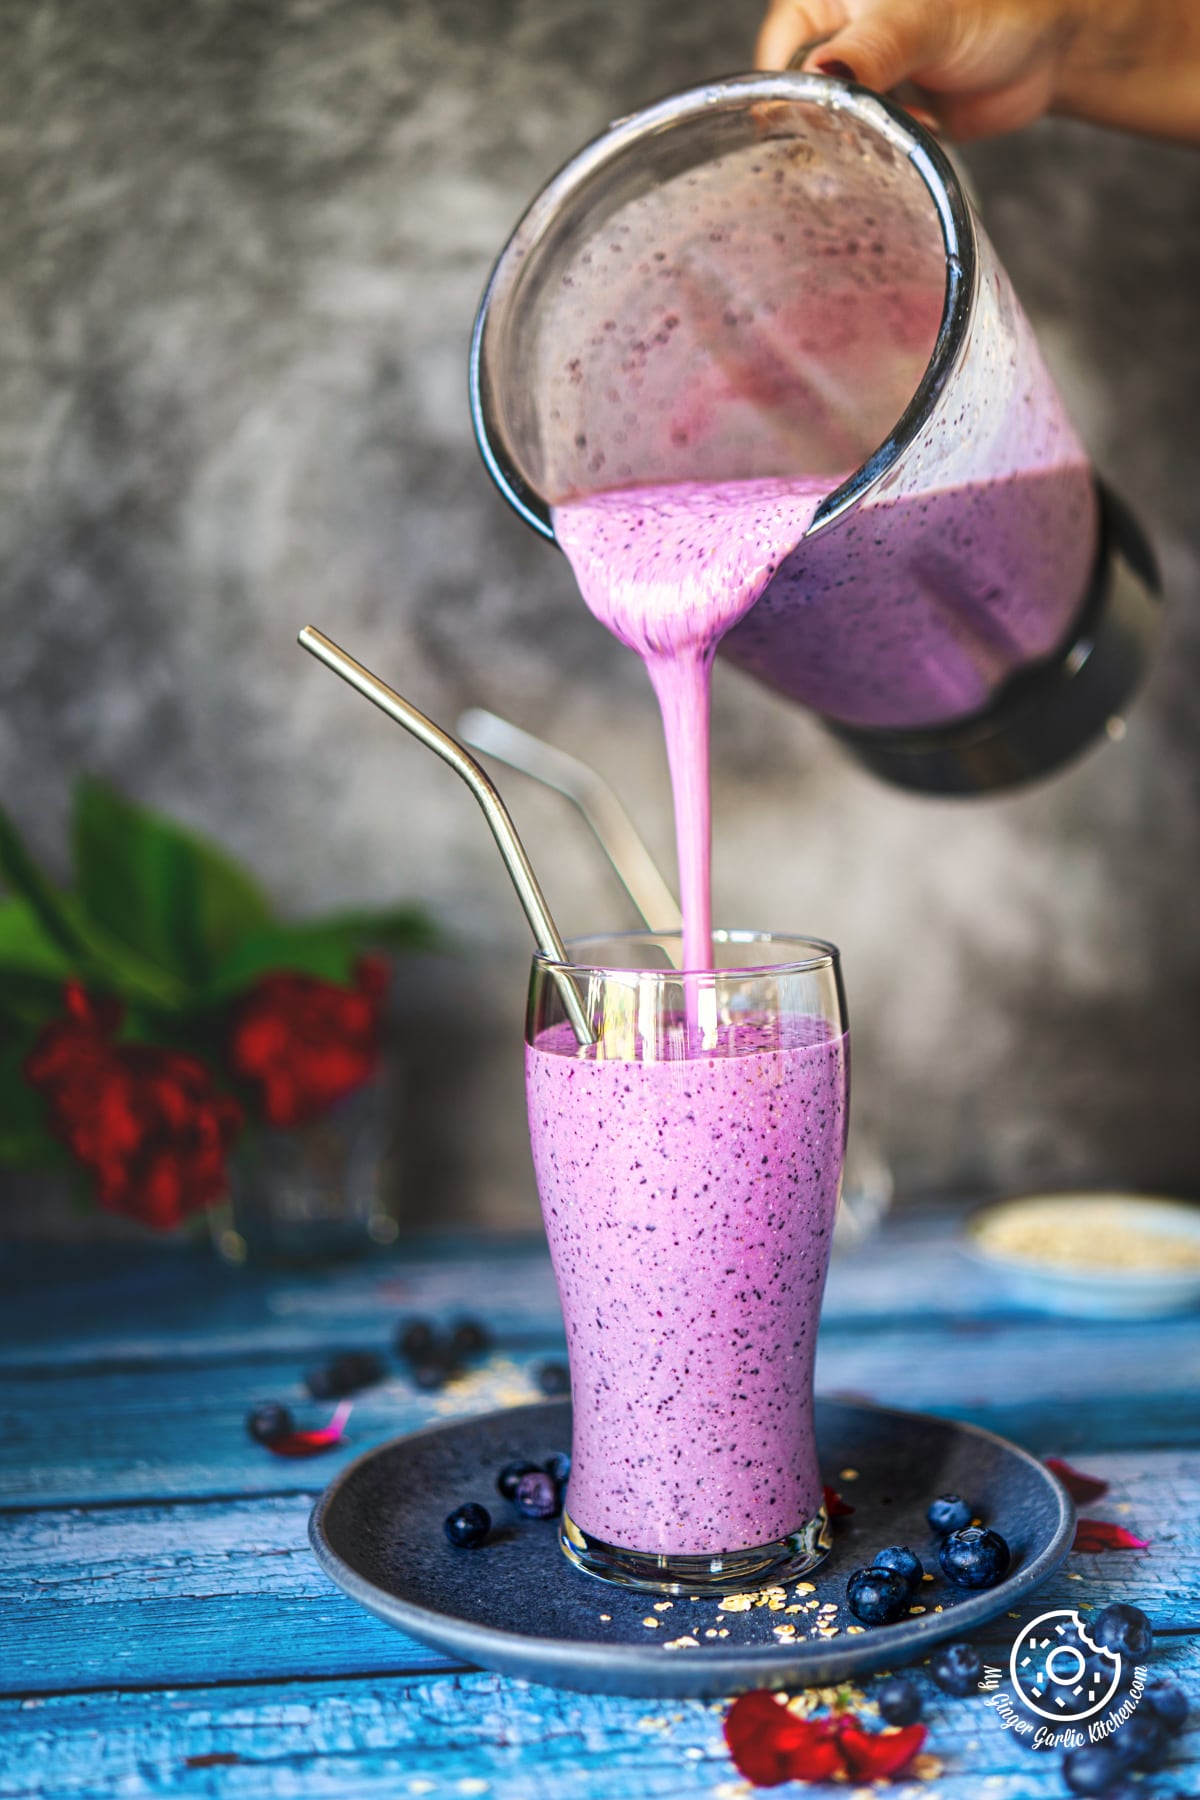 a hand pouring healthy blueberry pie smoothie in a glass from a blender jar